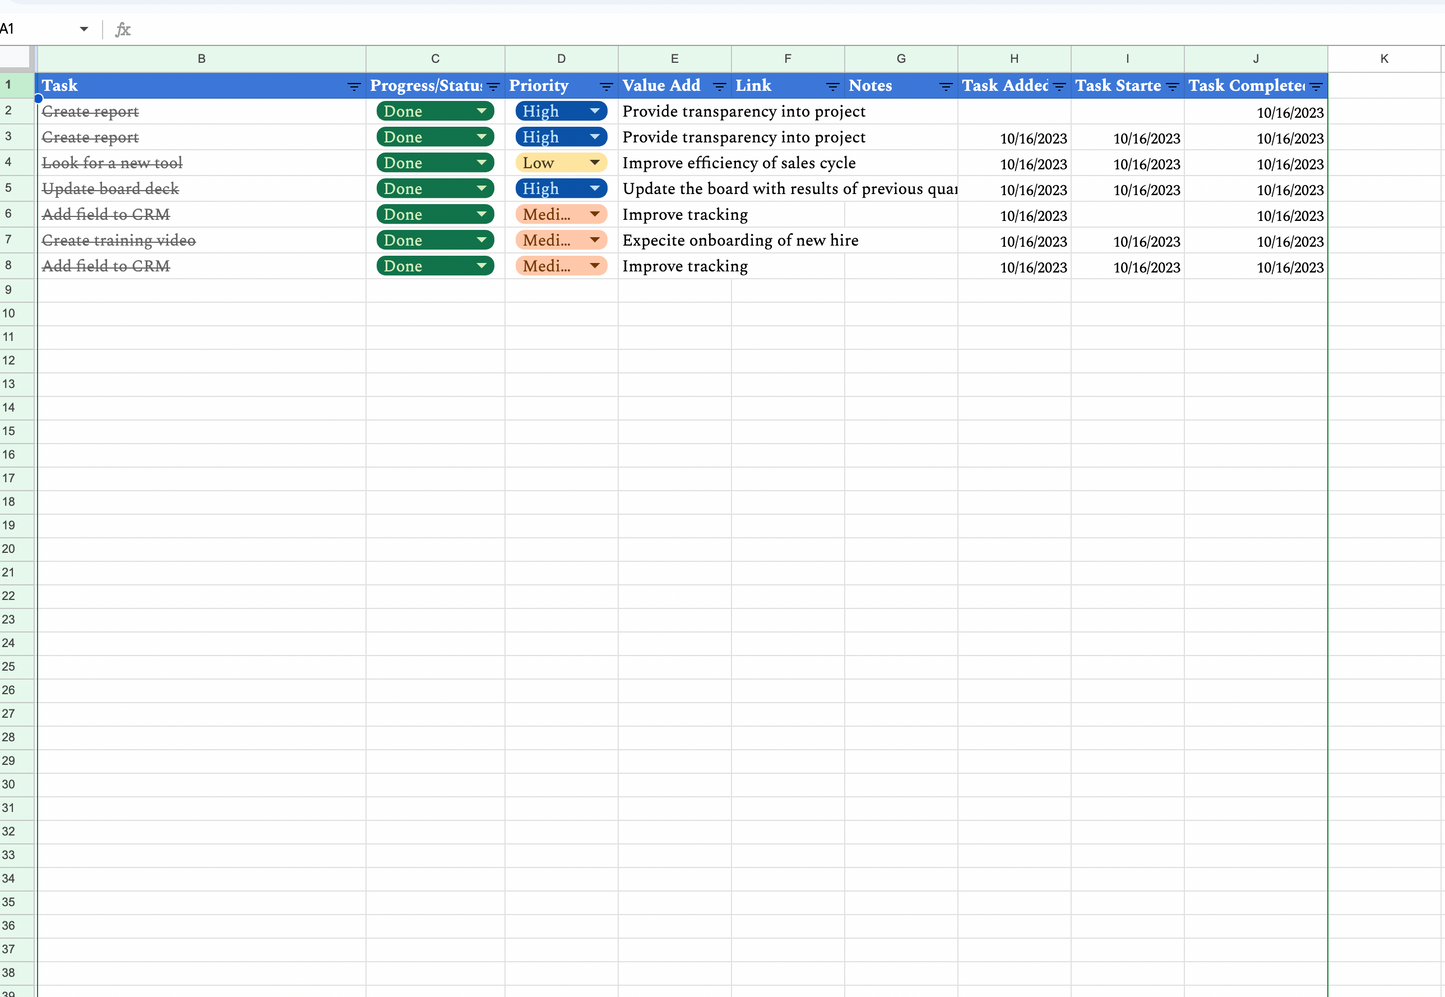 Original Custom Task Tracker with Apps Script Upgrade (Google Sheets Only)